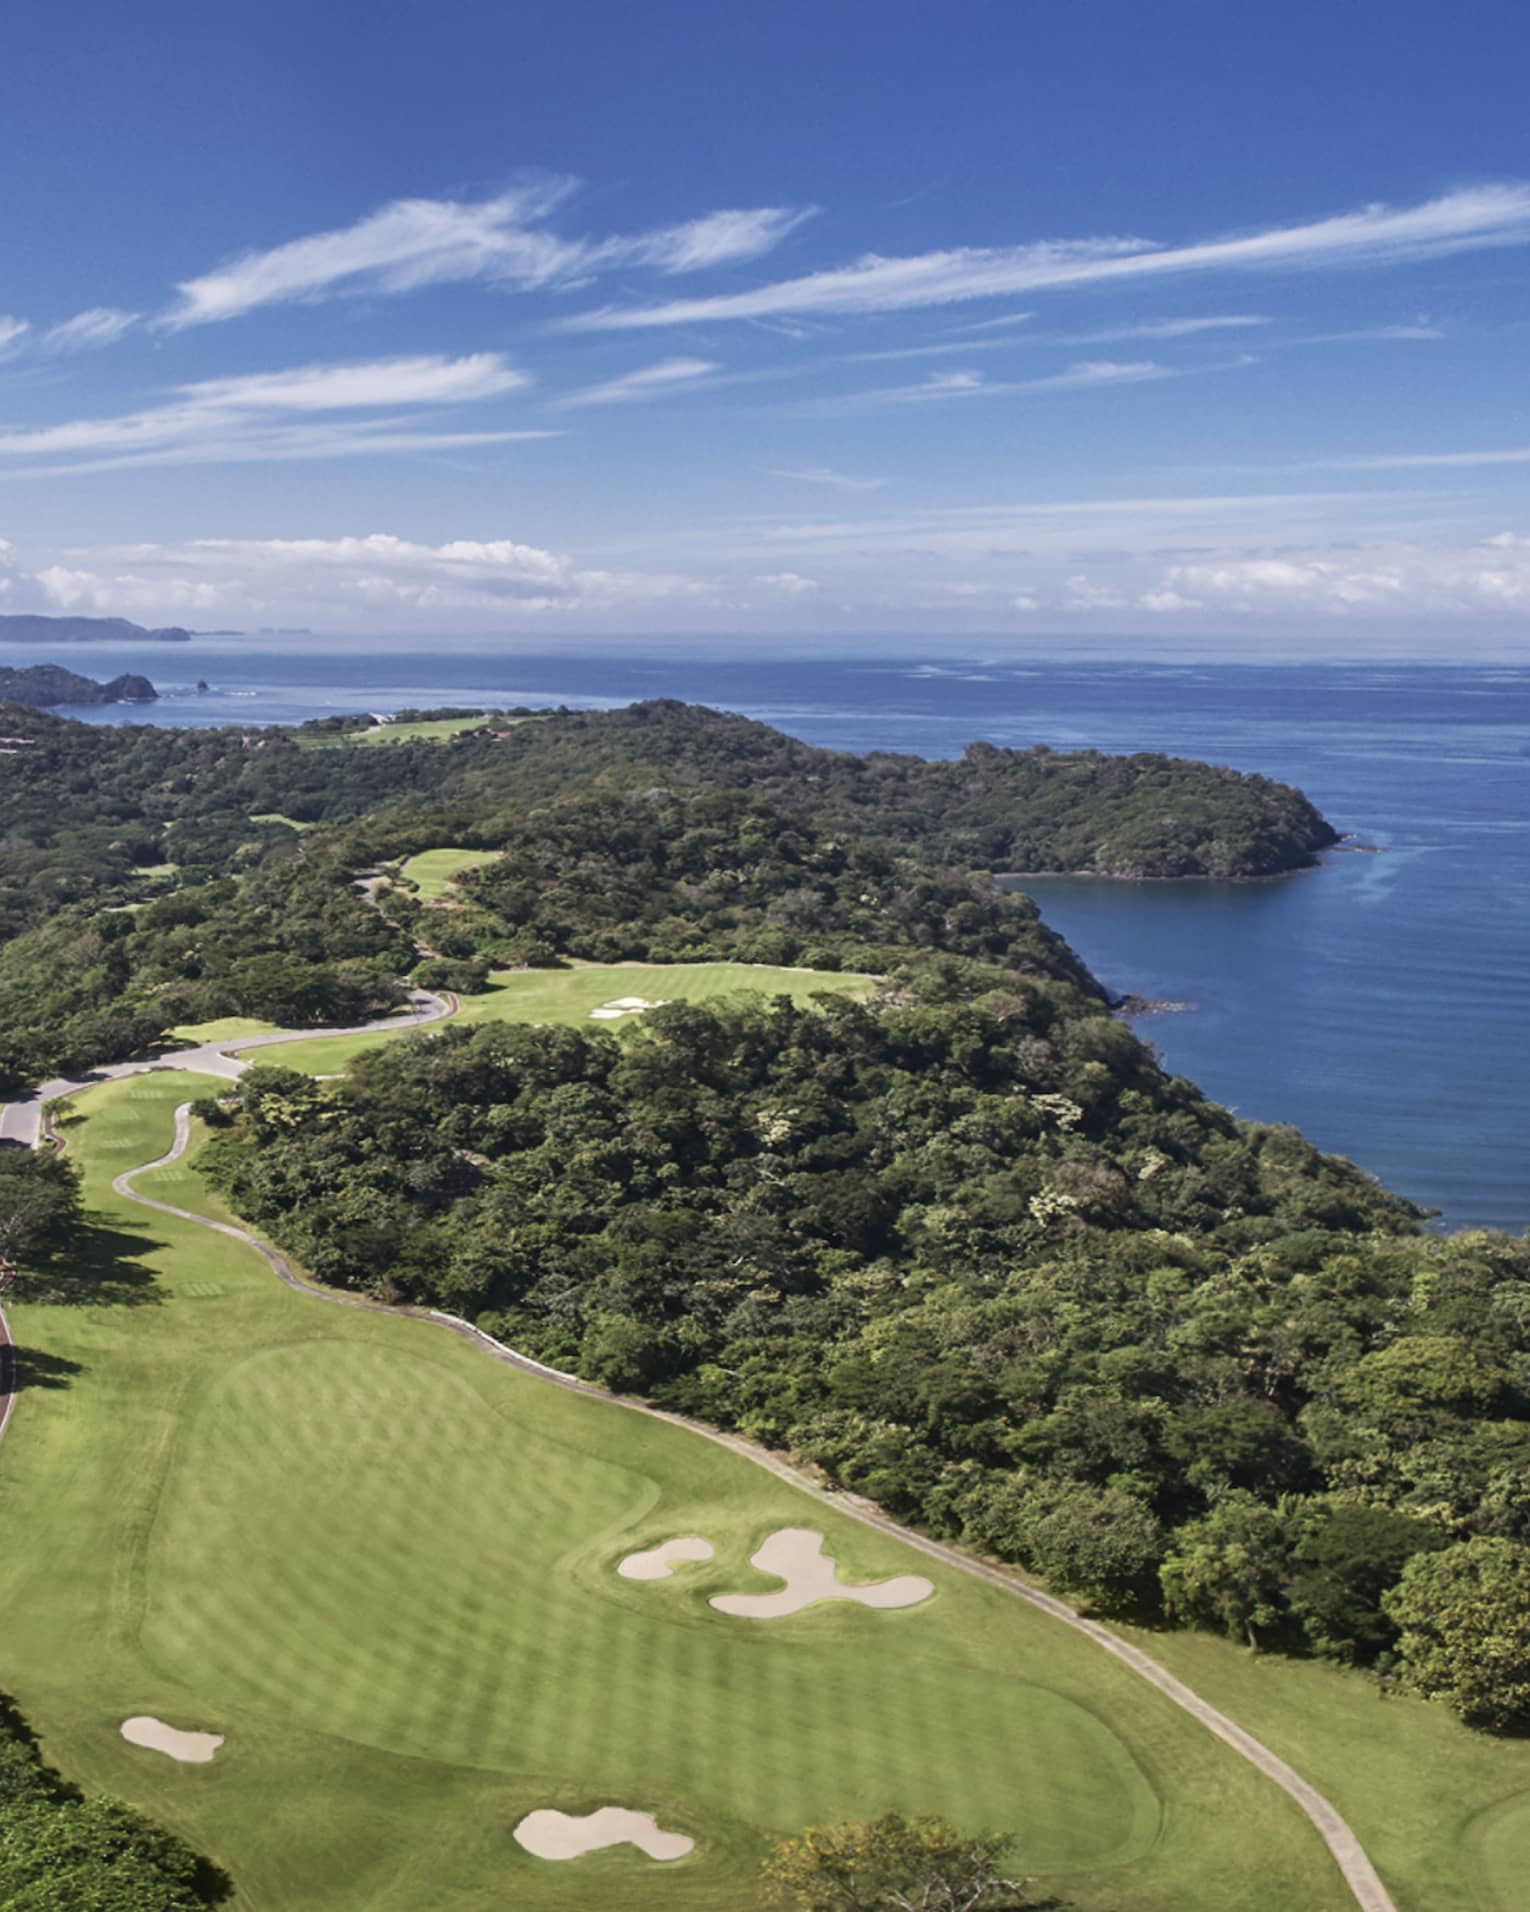 Aerial view of a golf course that stretches along a verdant peninsula by the sea